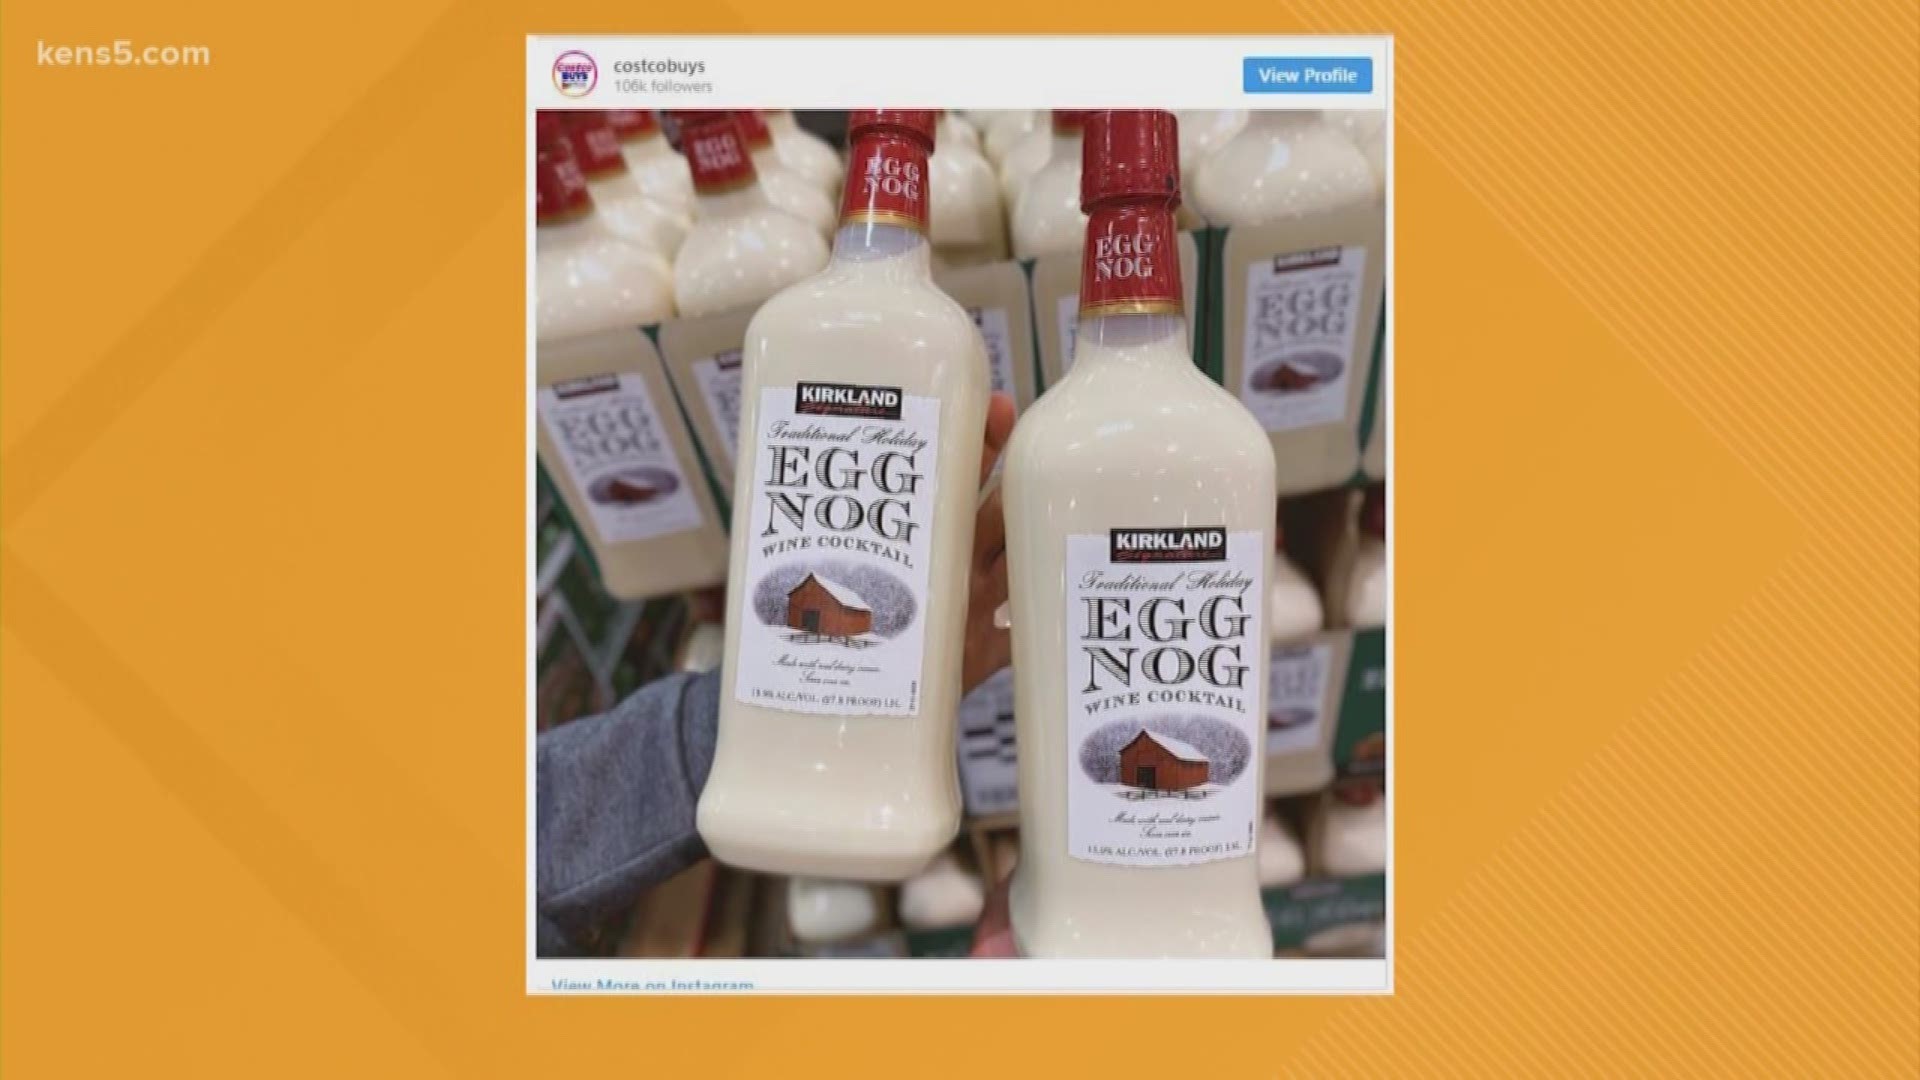 Egg nog wine?! Yes, it's a real thing. Digital journalist Lexi Hazlett shares more on how you can grab a bottle for the holidays.